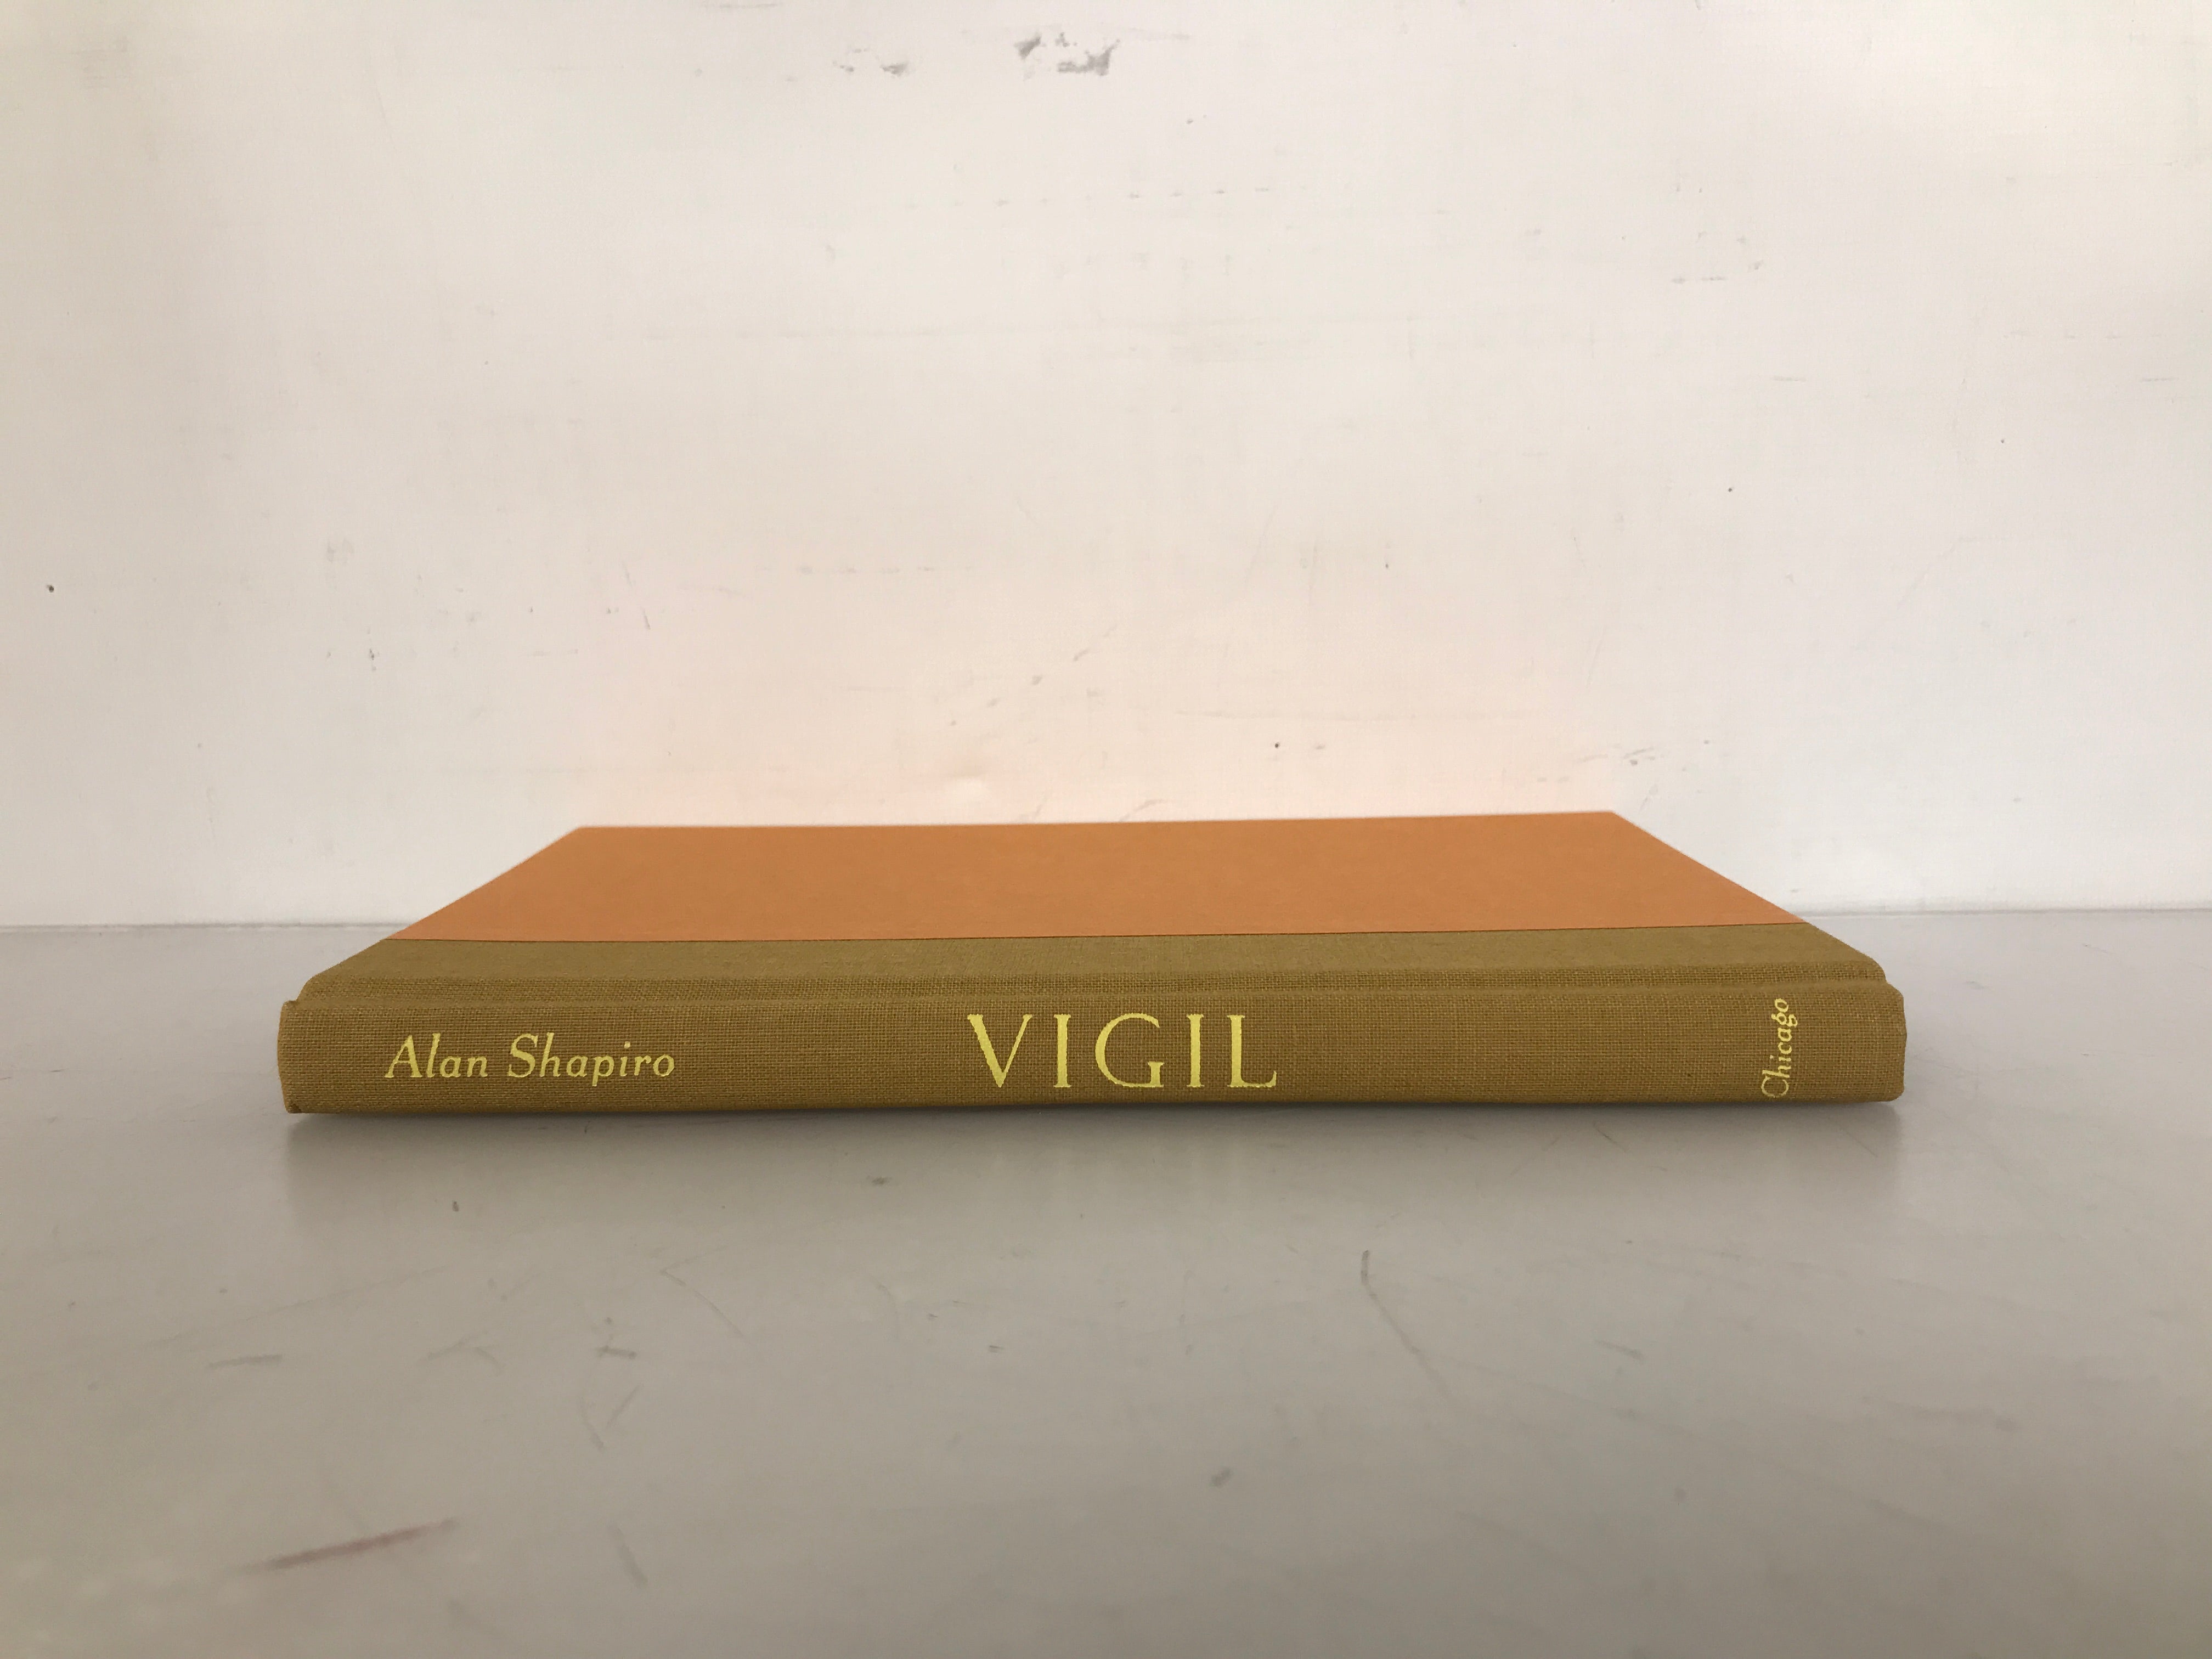 Vigil by Alan Shapiro 1997 First Edition Signed by Author